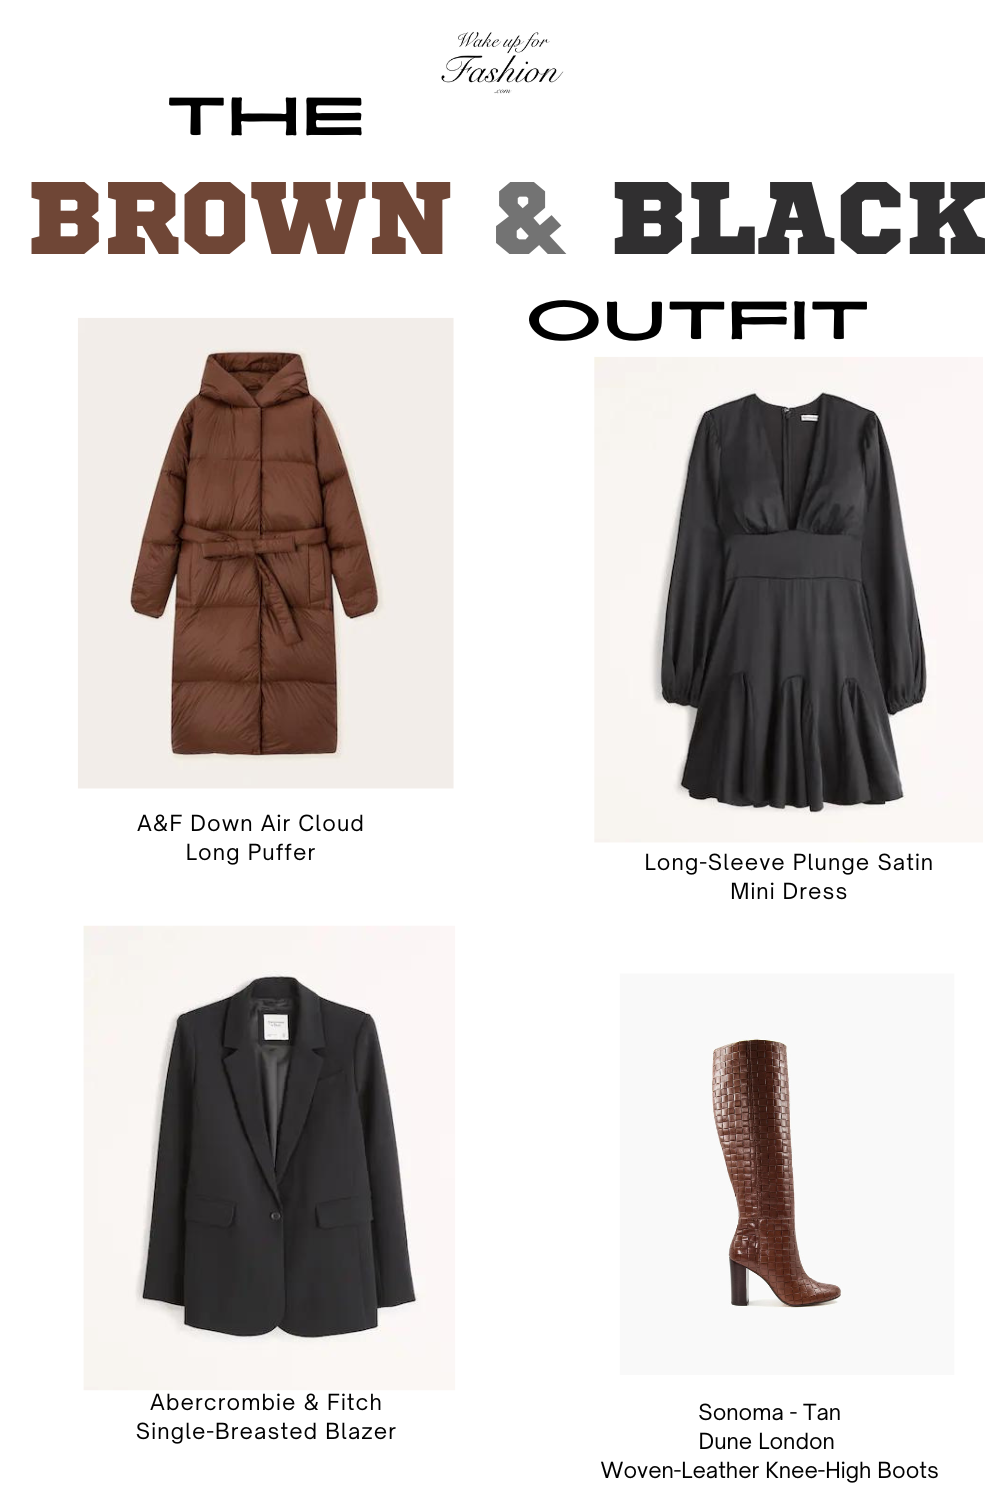 Winter outfit including a brown trench coat, black blazer, black dress and brown boots.